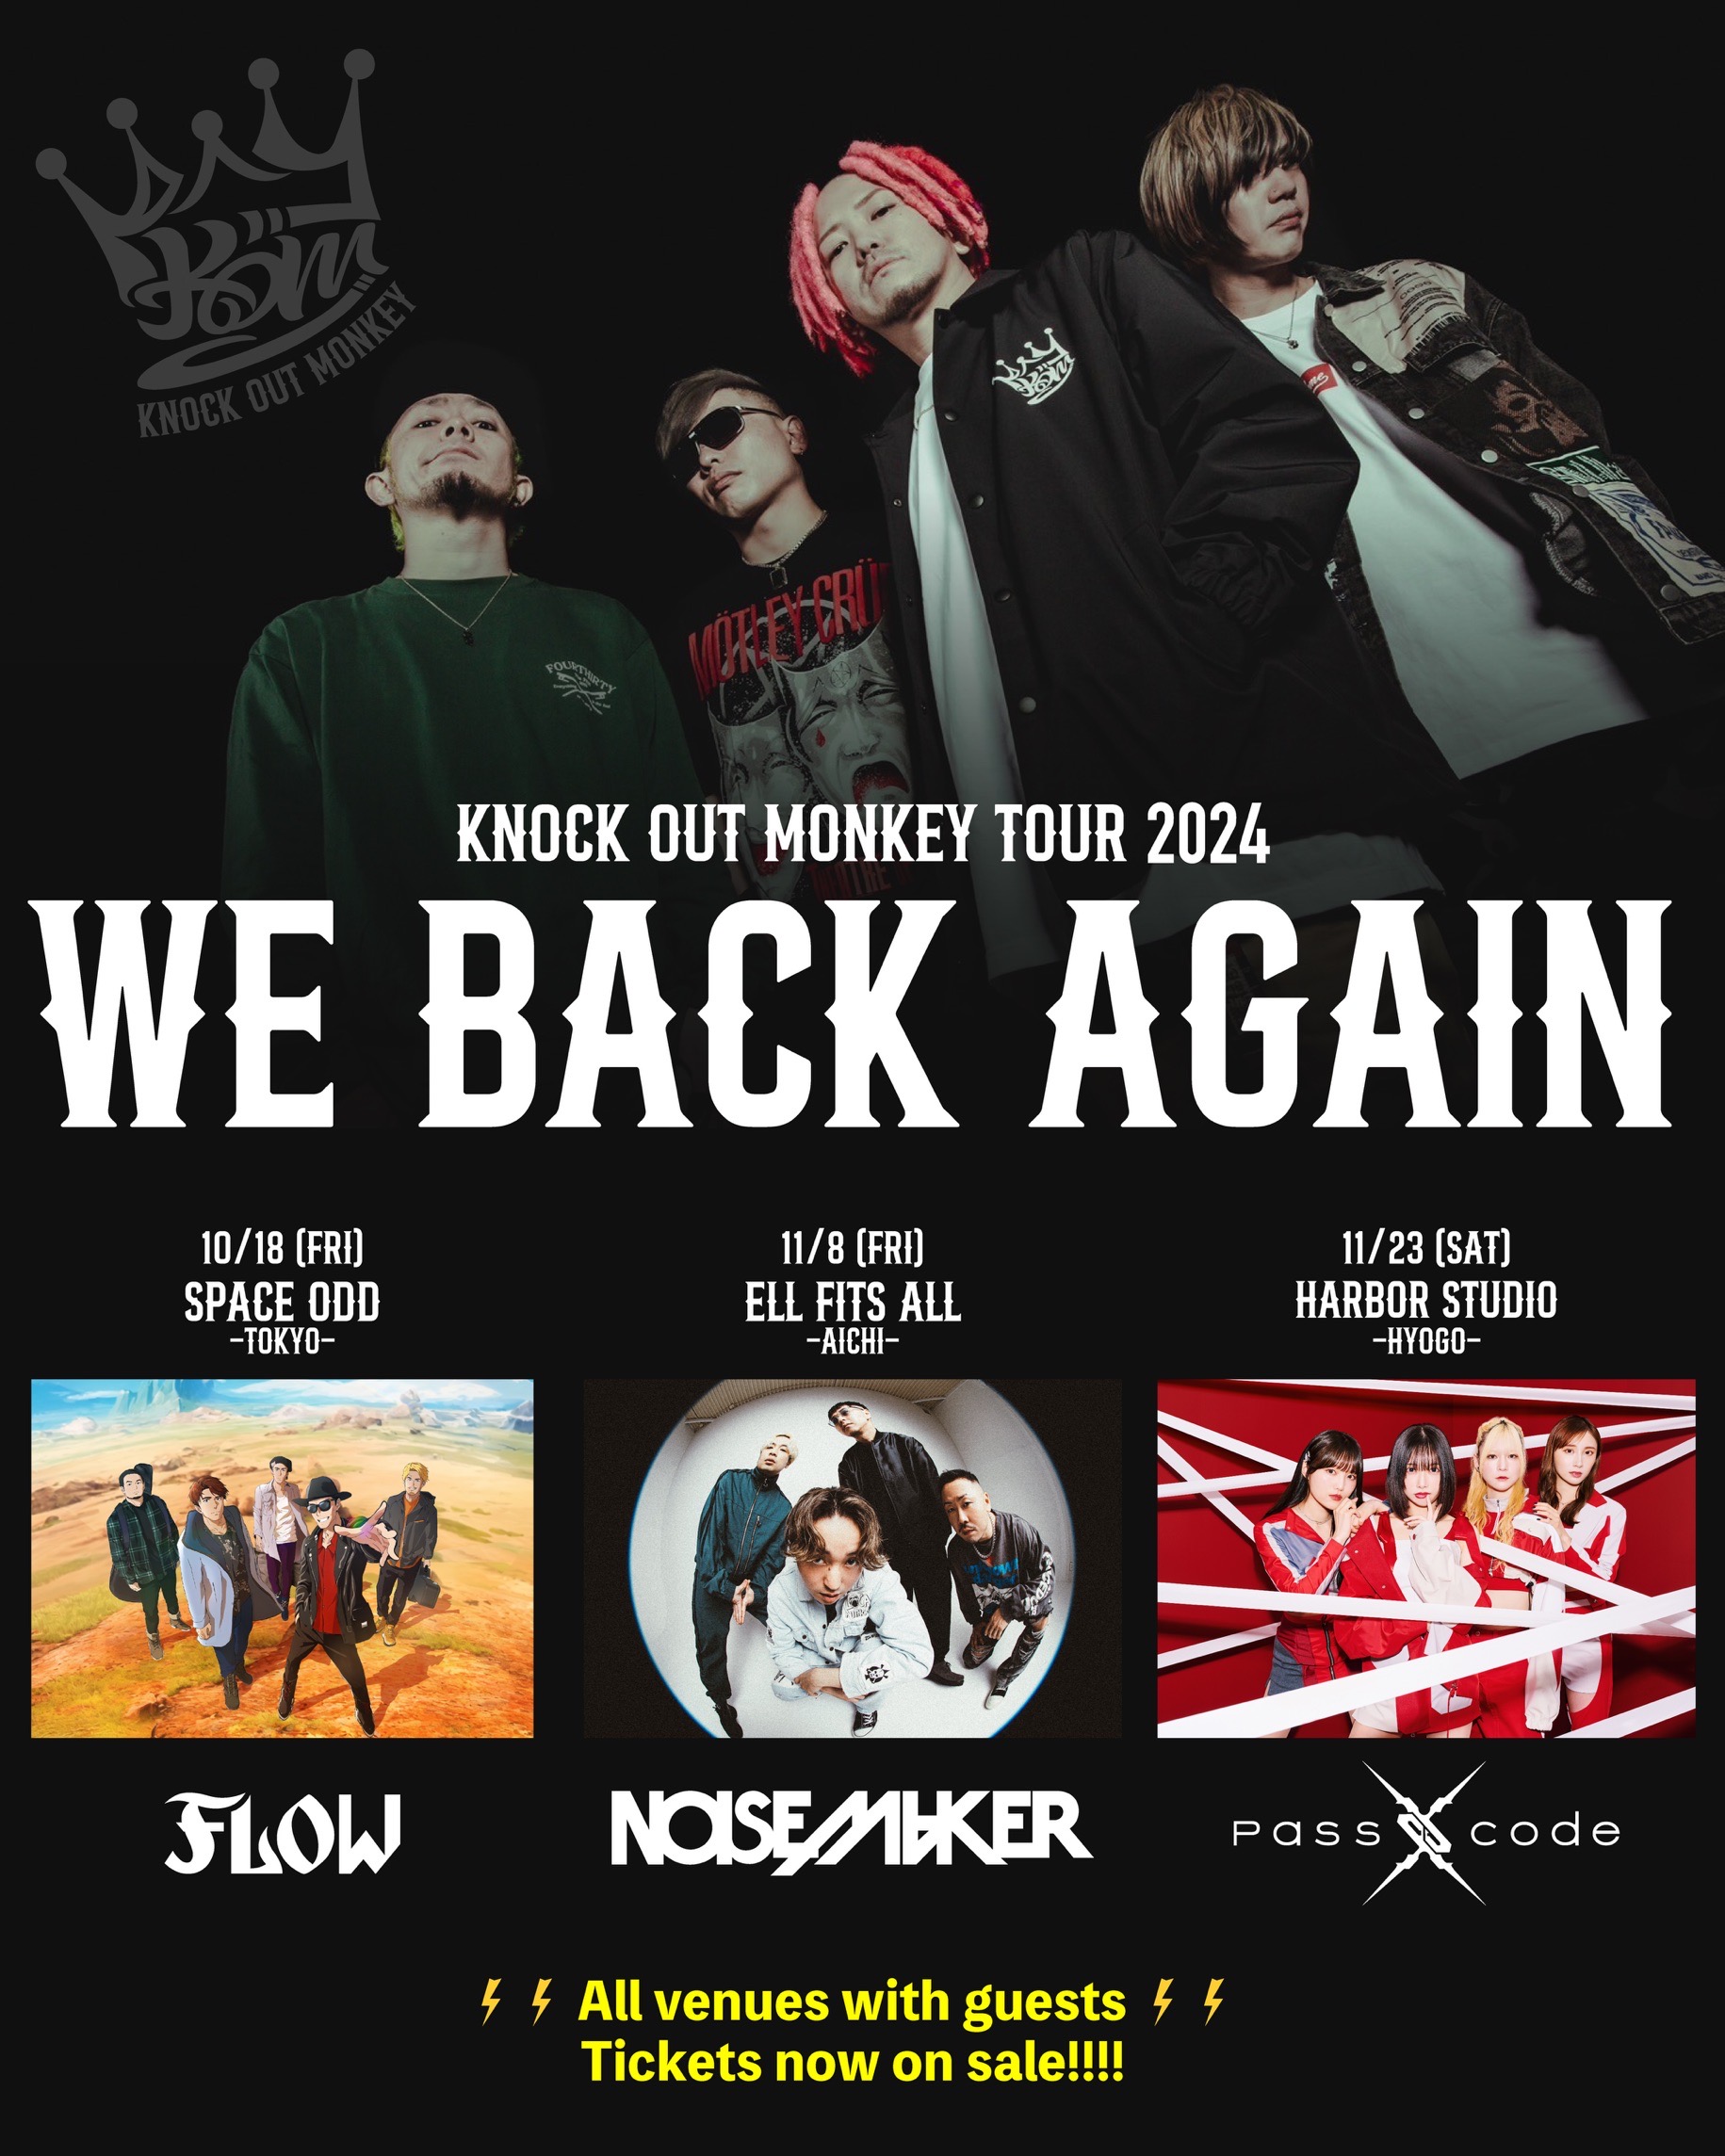 KNOCK OUT MONKEY TOUR 2024 "WE BACK AGAIN"